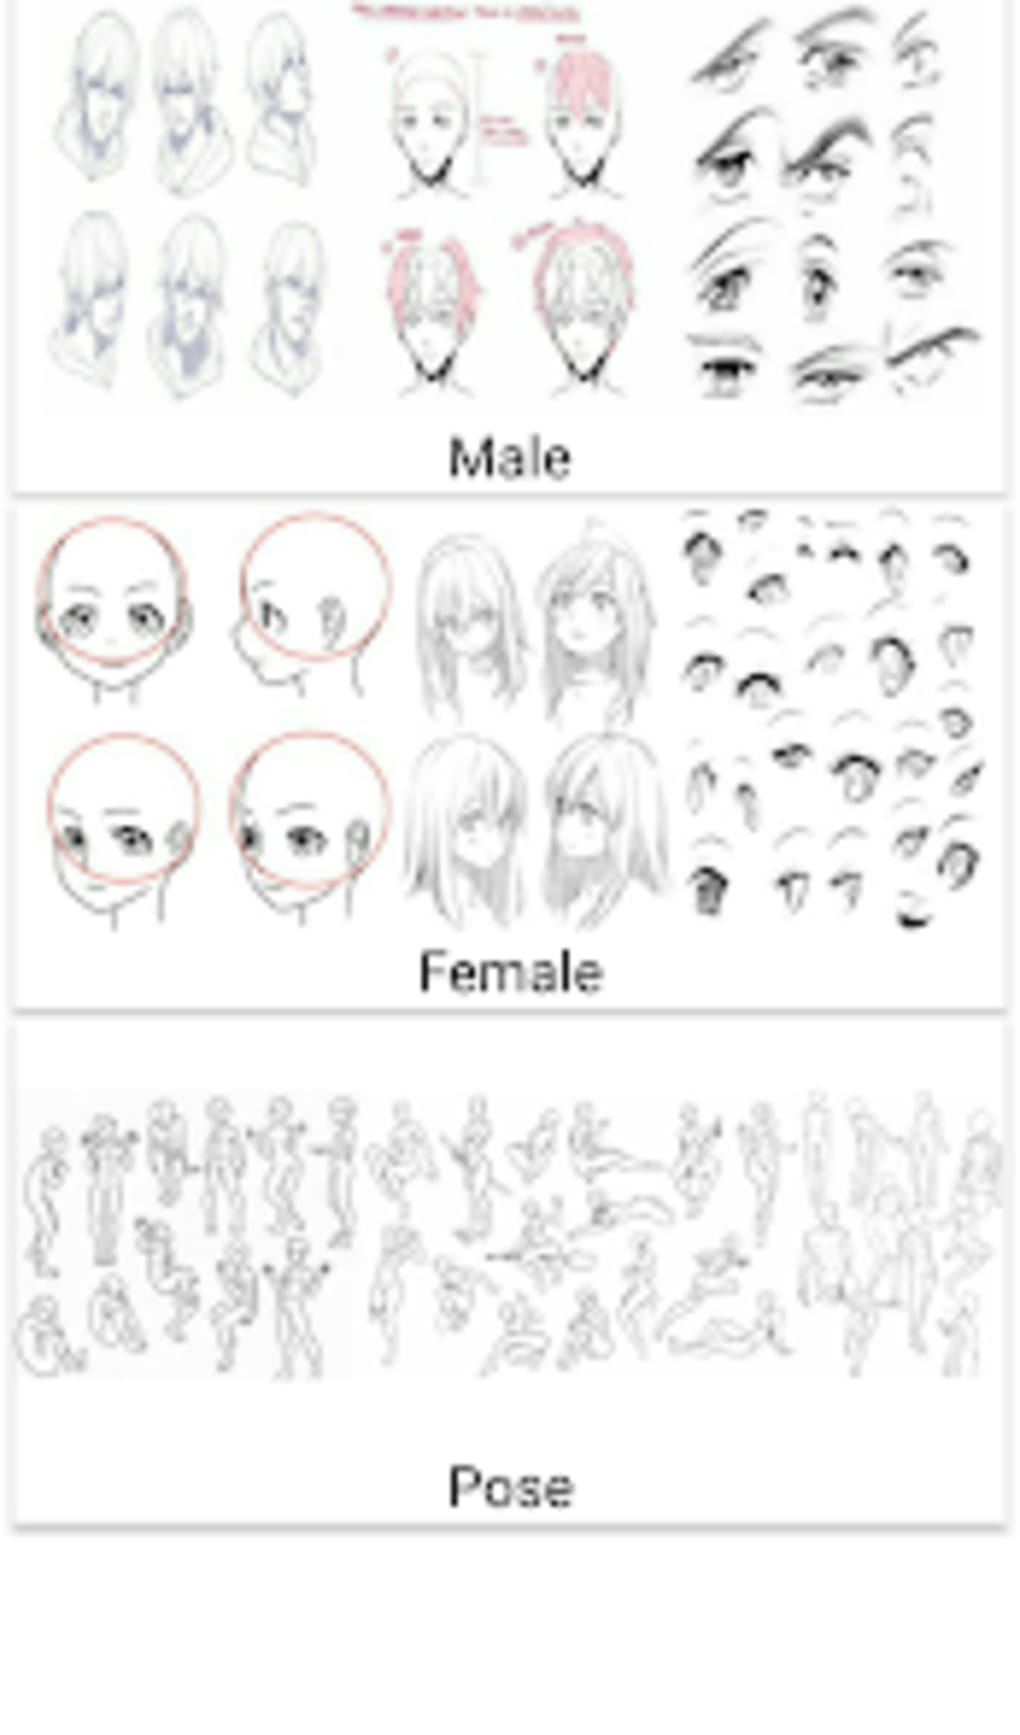 How To Draw Anime Face SIDE VIEW  YouTube